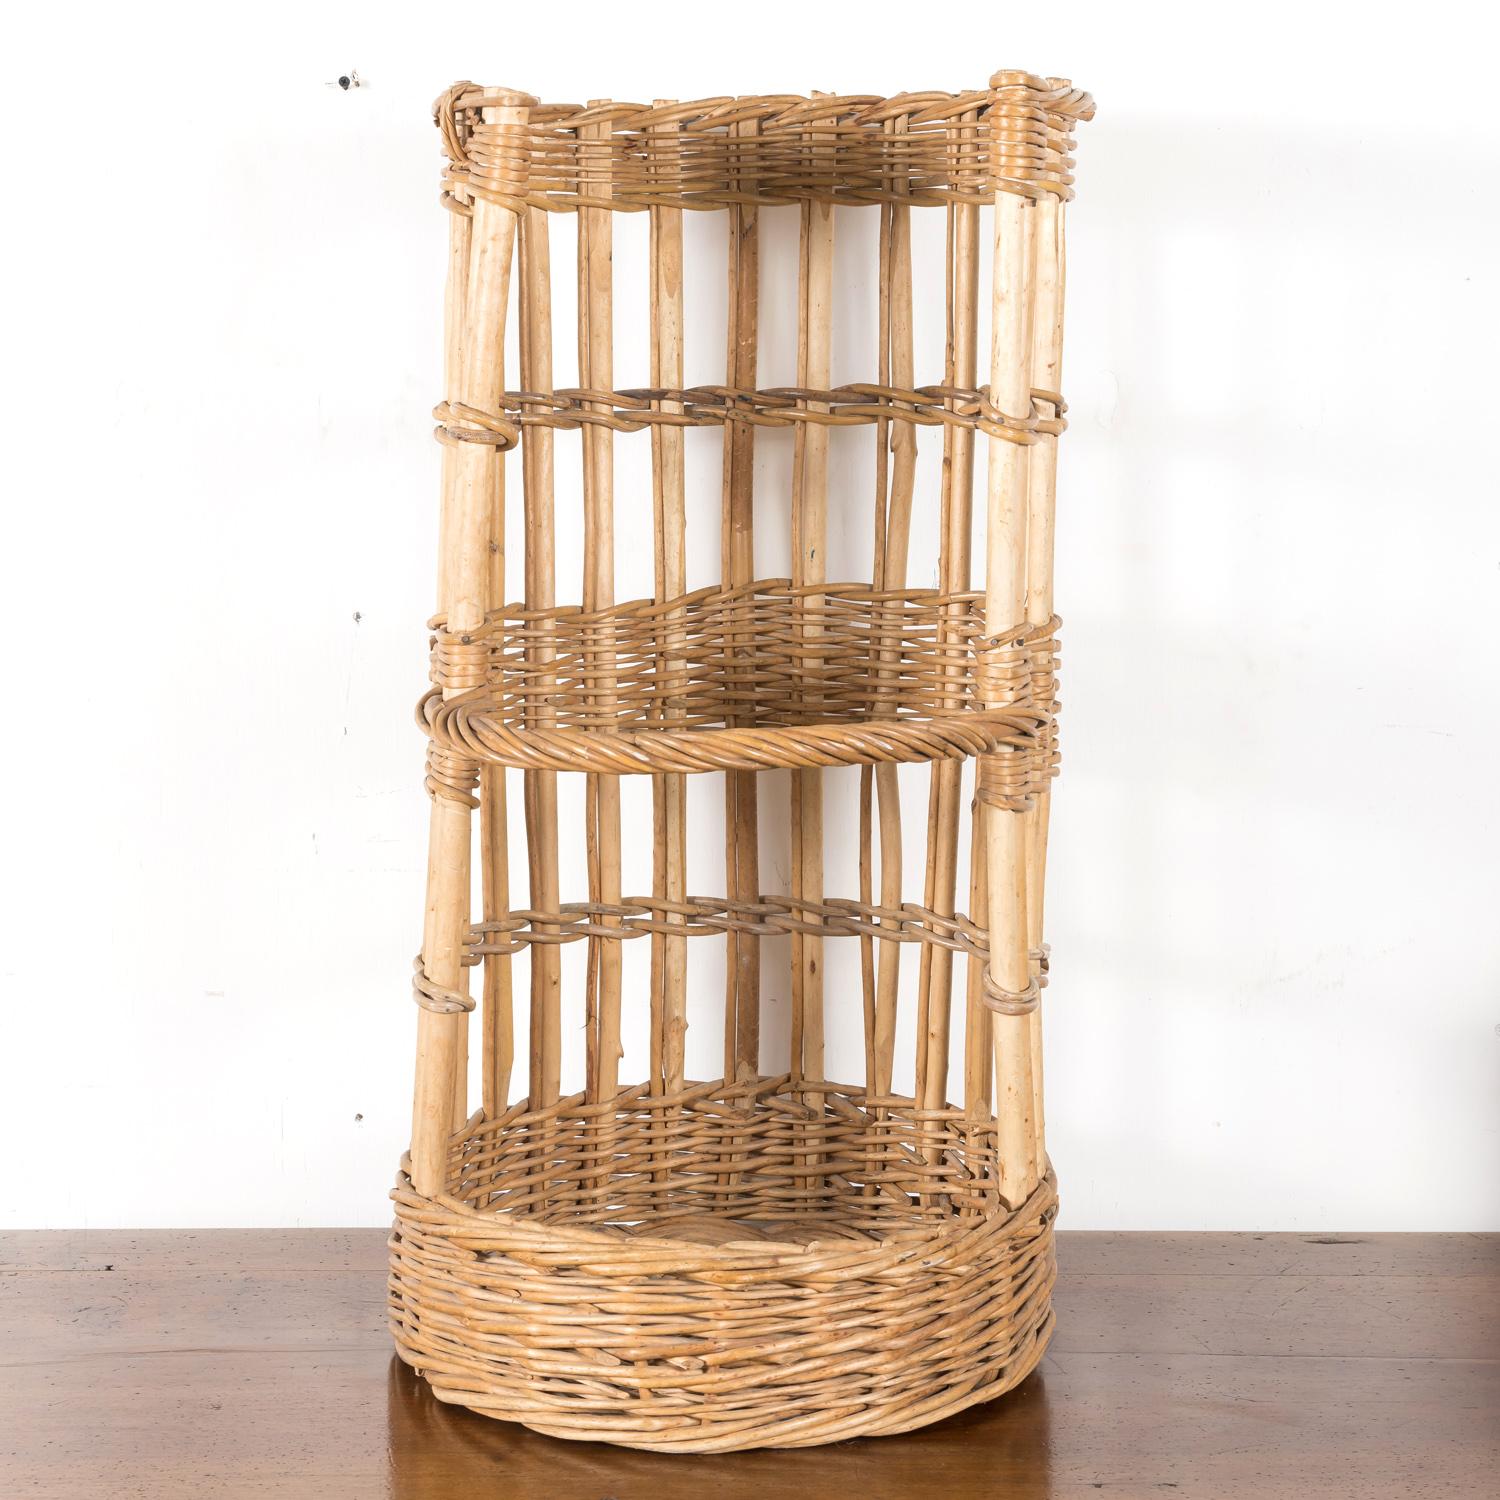 19th Century, Large Open Sided French Boulangerie Baguette Basket In Good Condition For Sale In Birmingham, AL